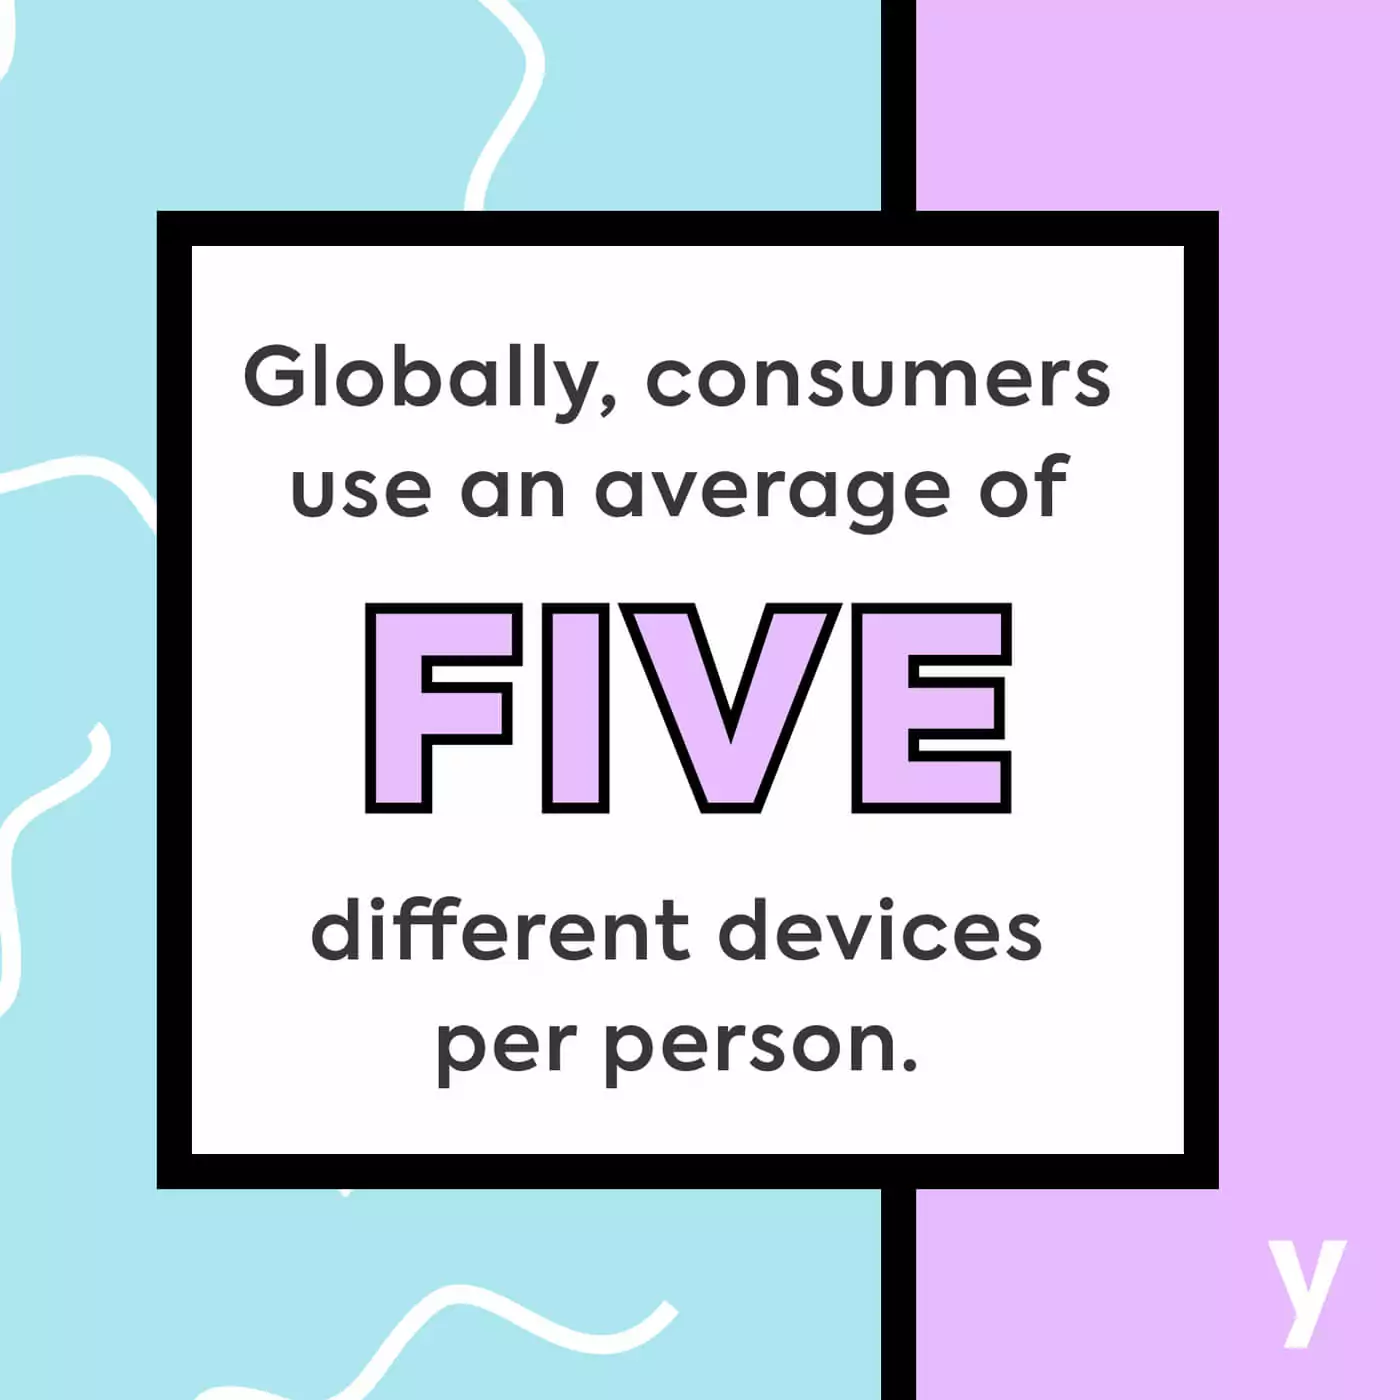 Global consumers use an average of five different devices per person.